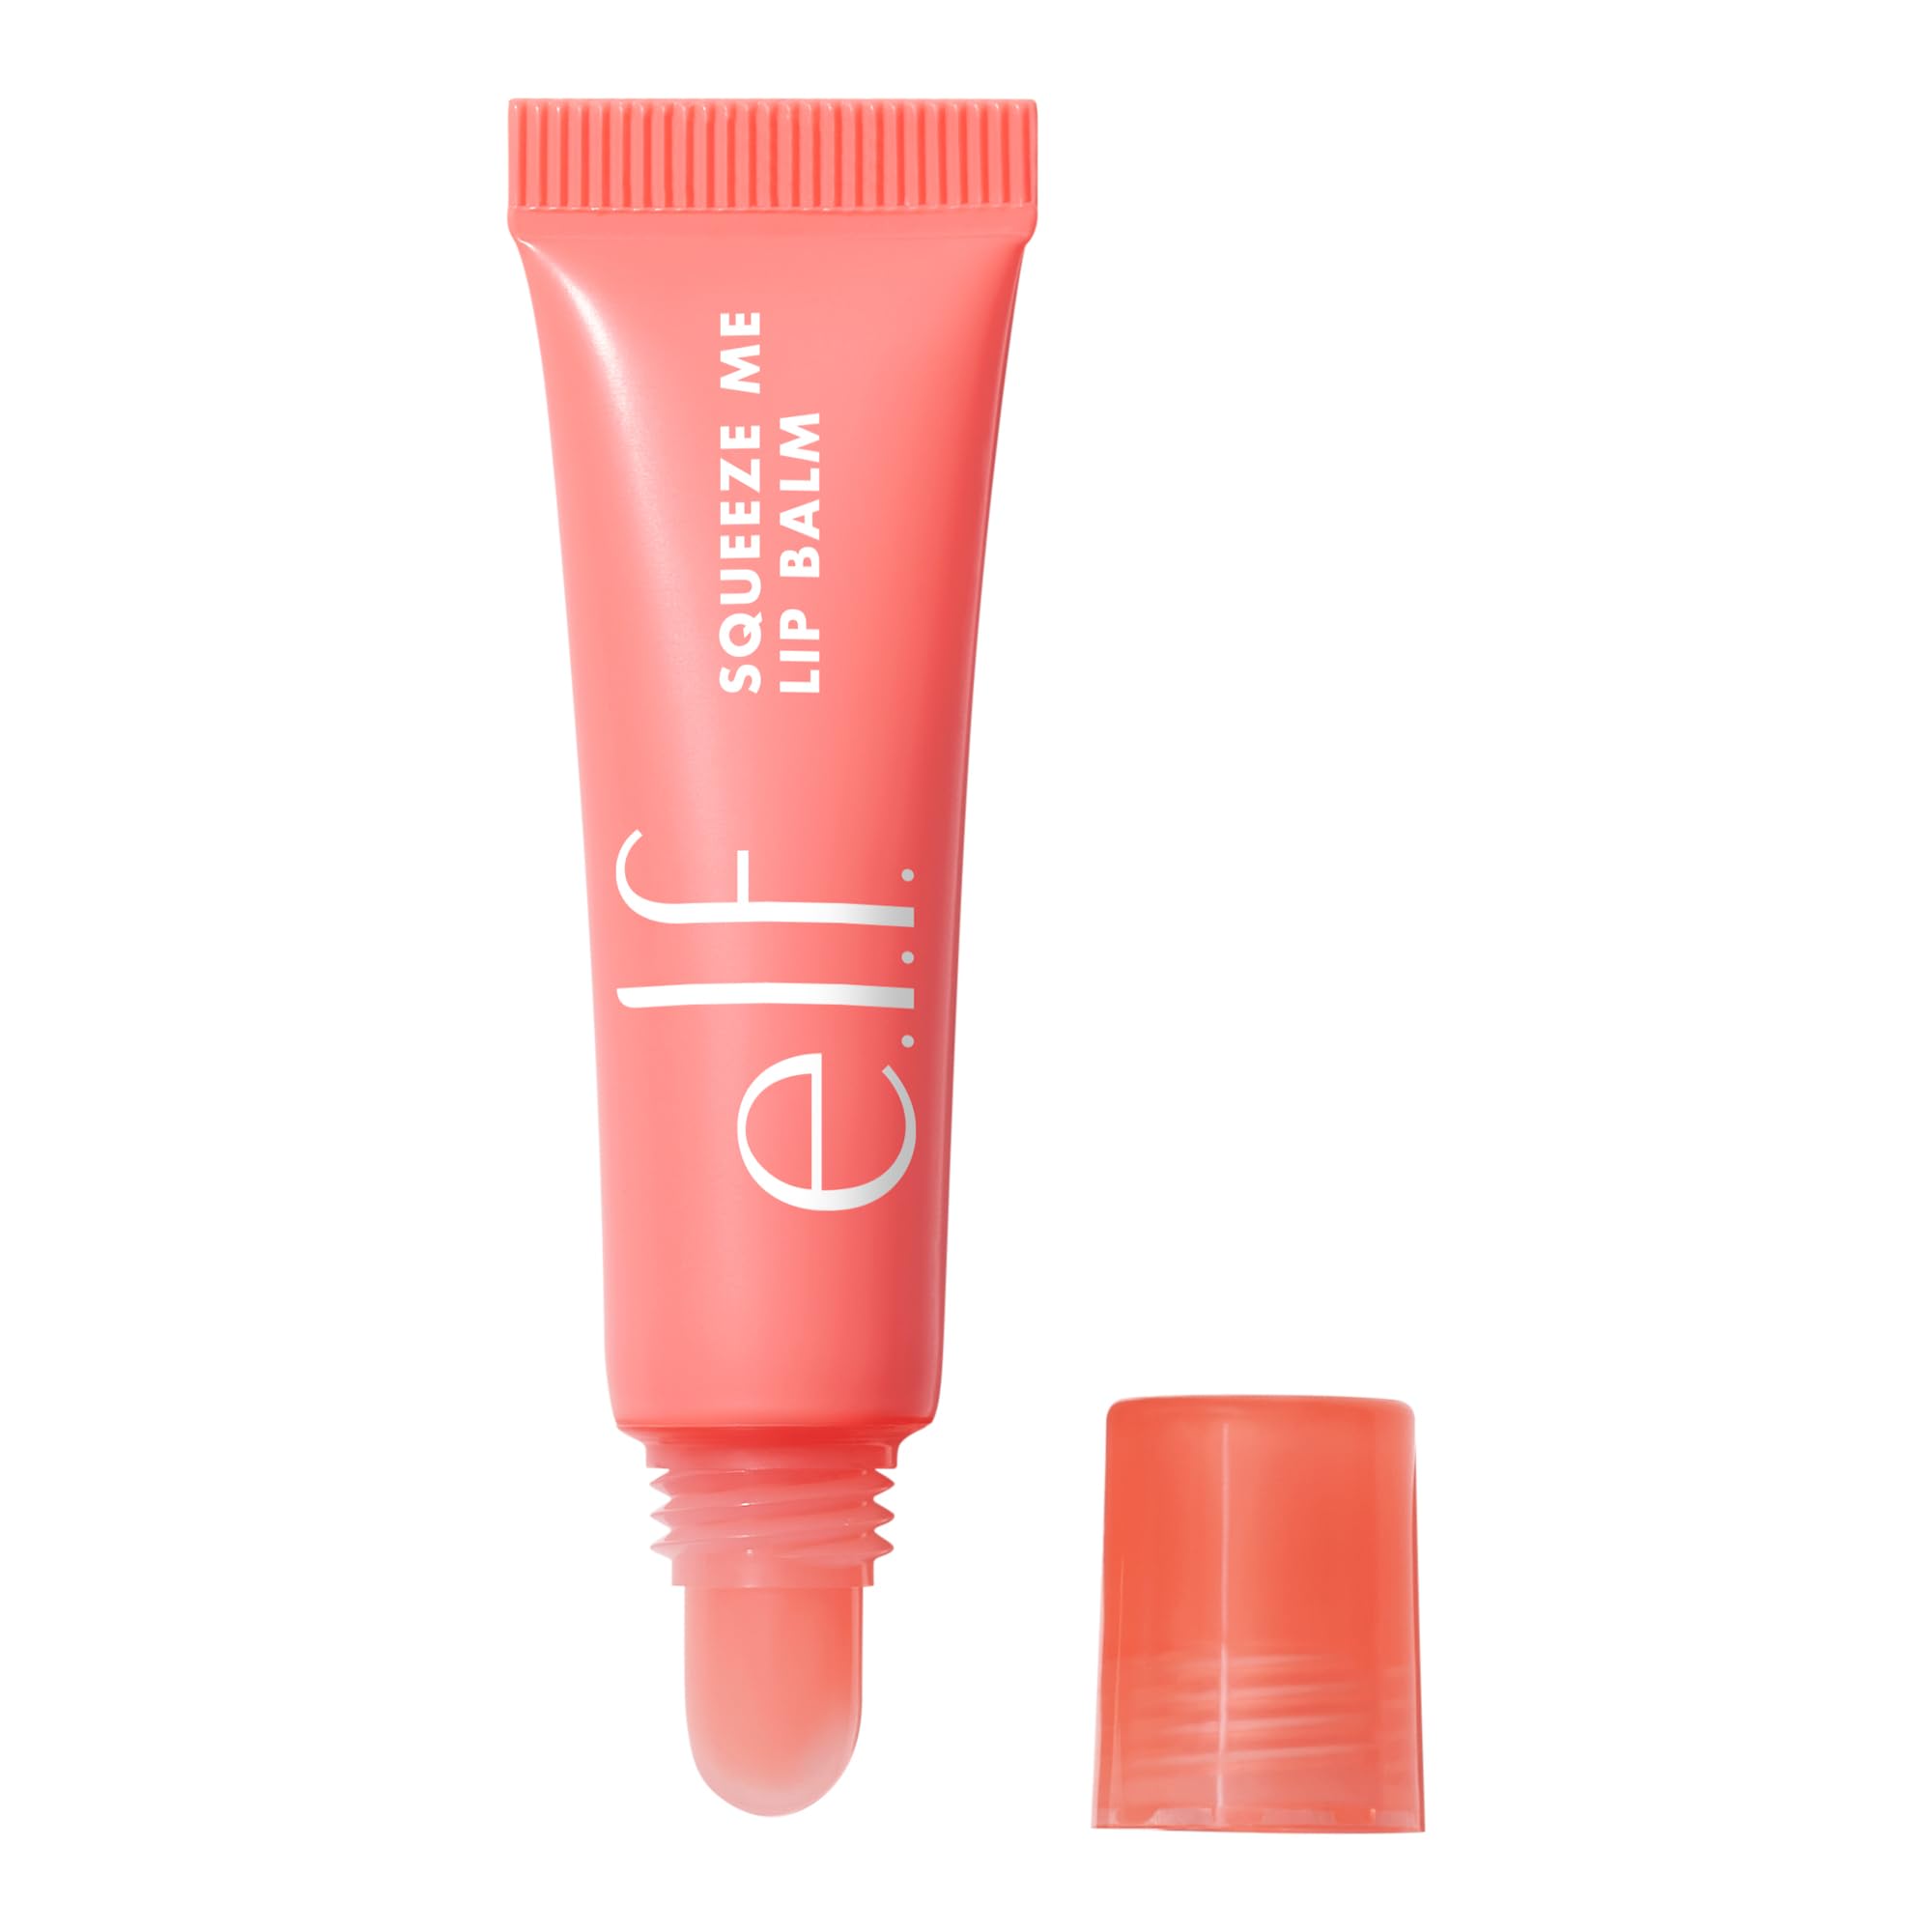 e.l.f. Squeeze Me Lip Balm, Moisturizing Lip Balm For A Sheer Tint Of Color, Infused With Hyaluronic Acid, Vegan & Cruelty-free, Strawberry